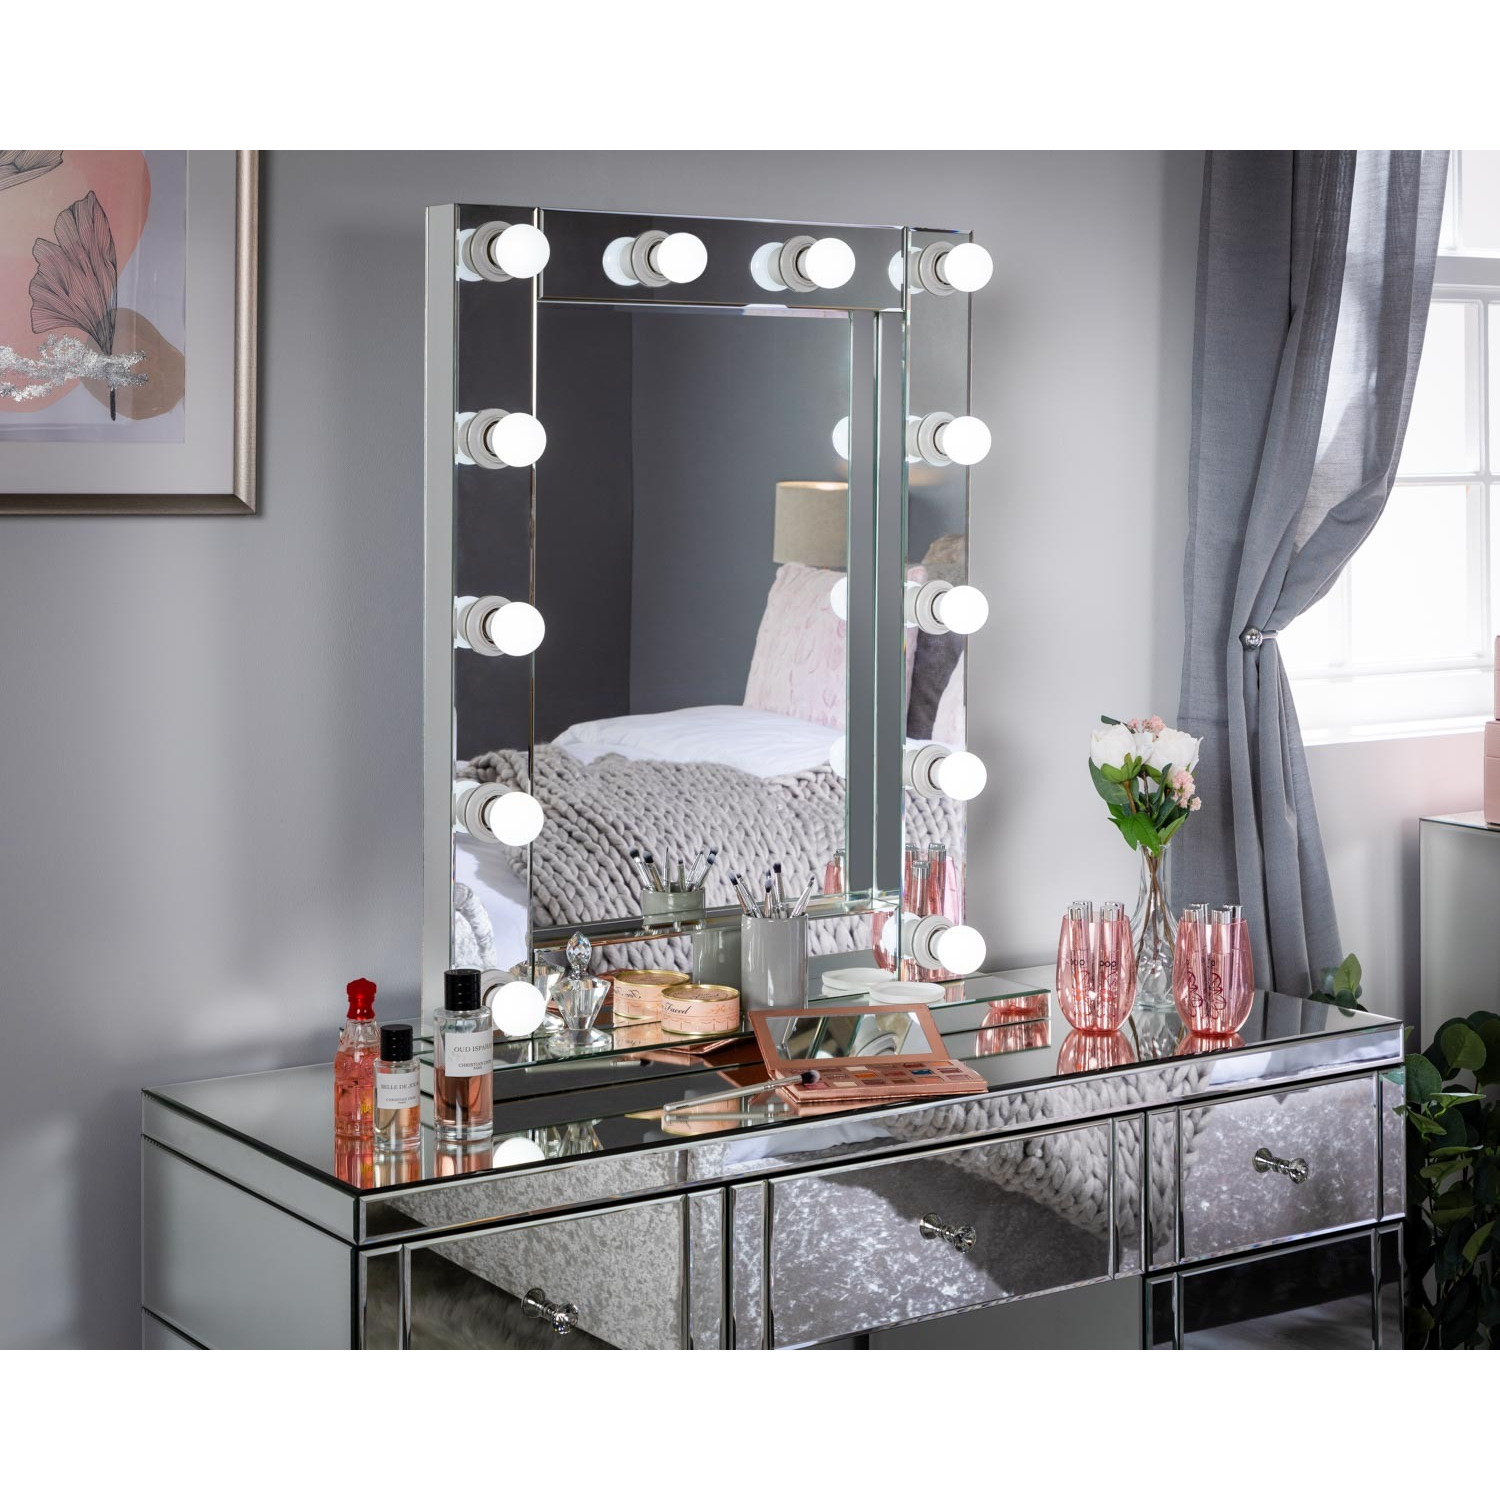 Small Hollywood Mirror With LED Lights - 62x79.5cm - image 1